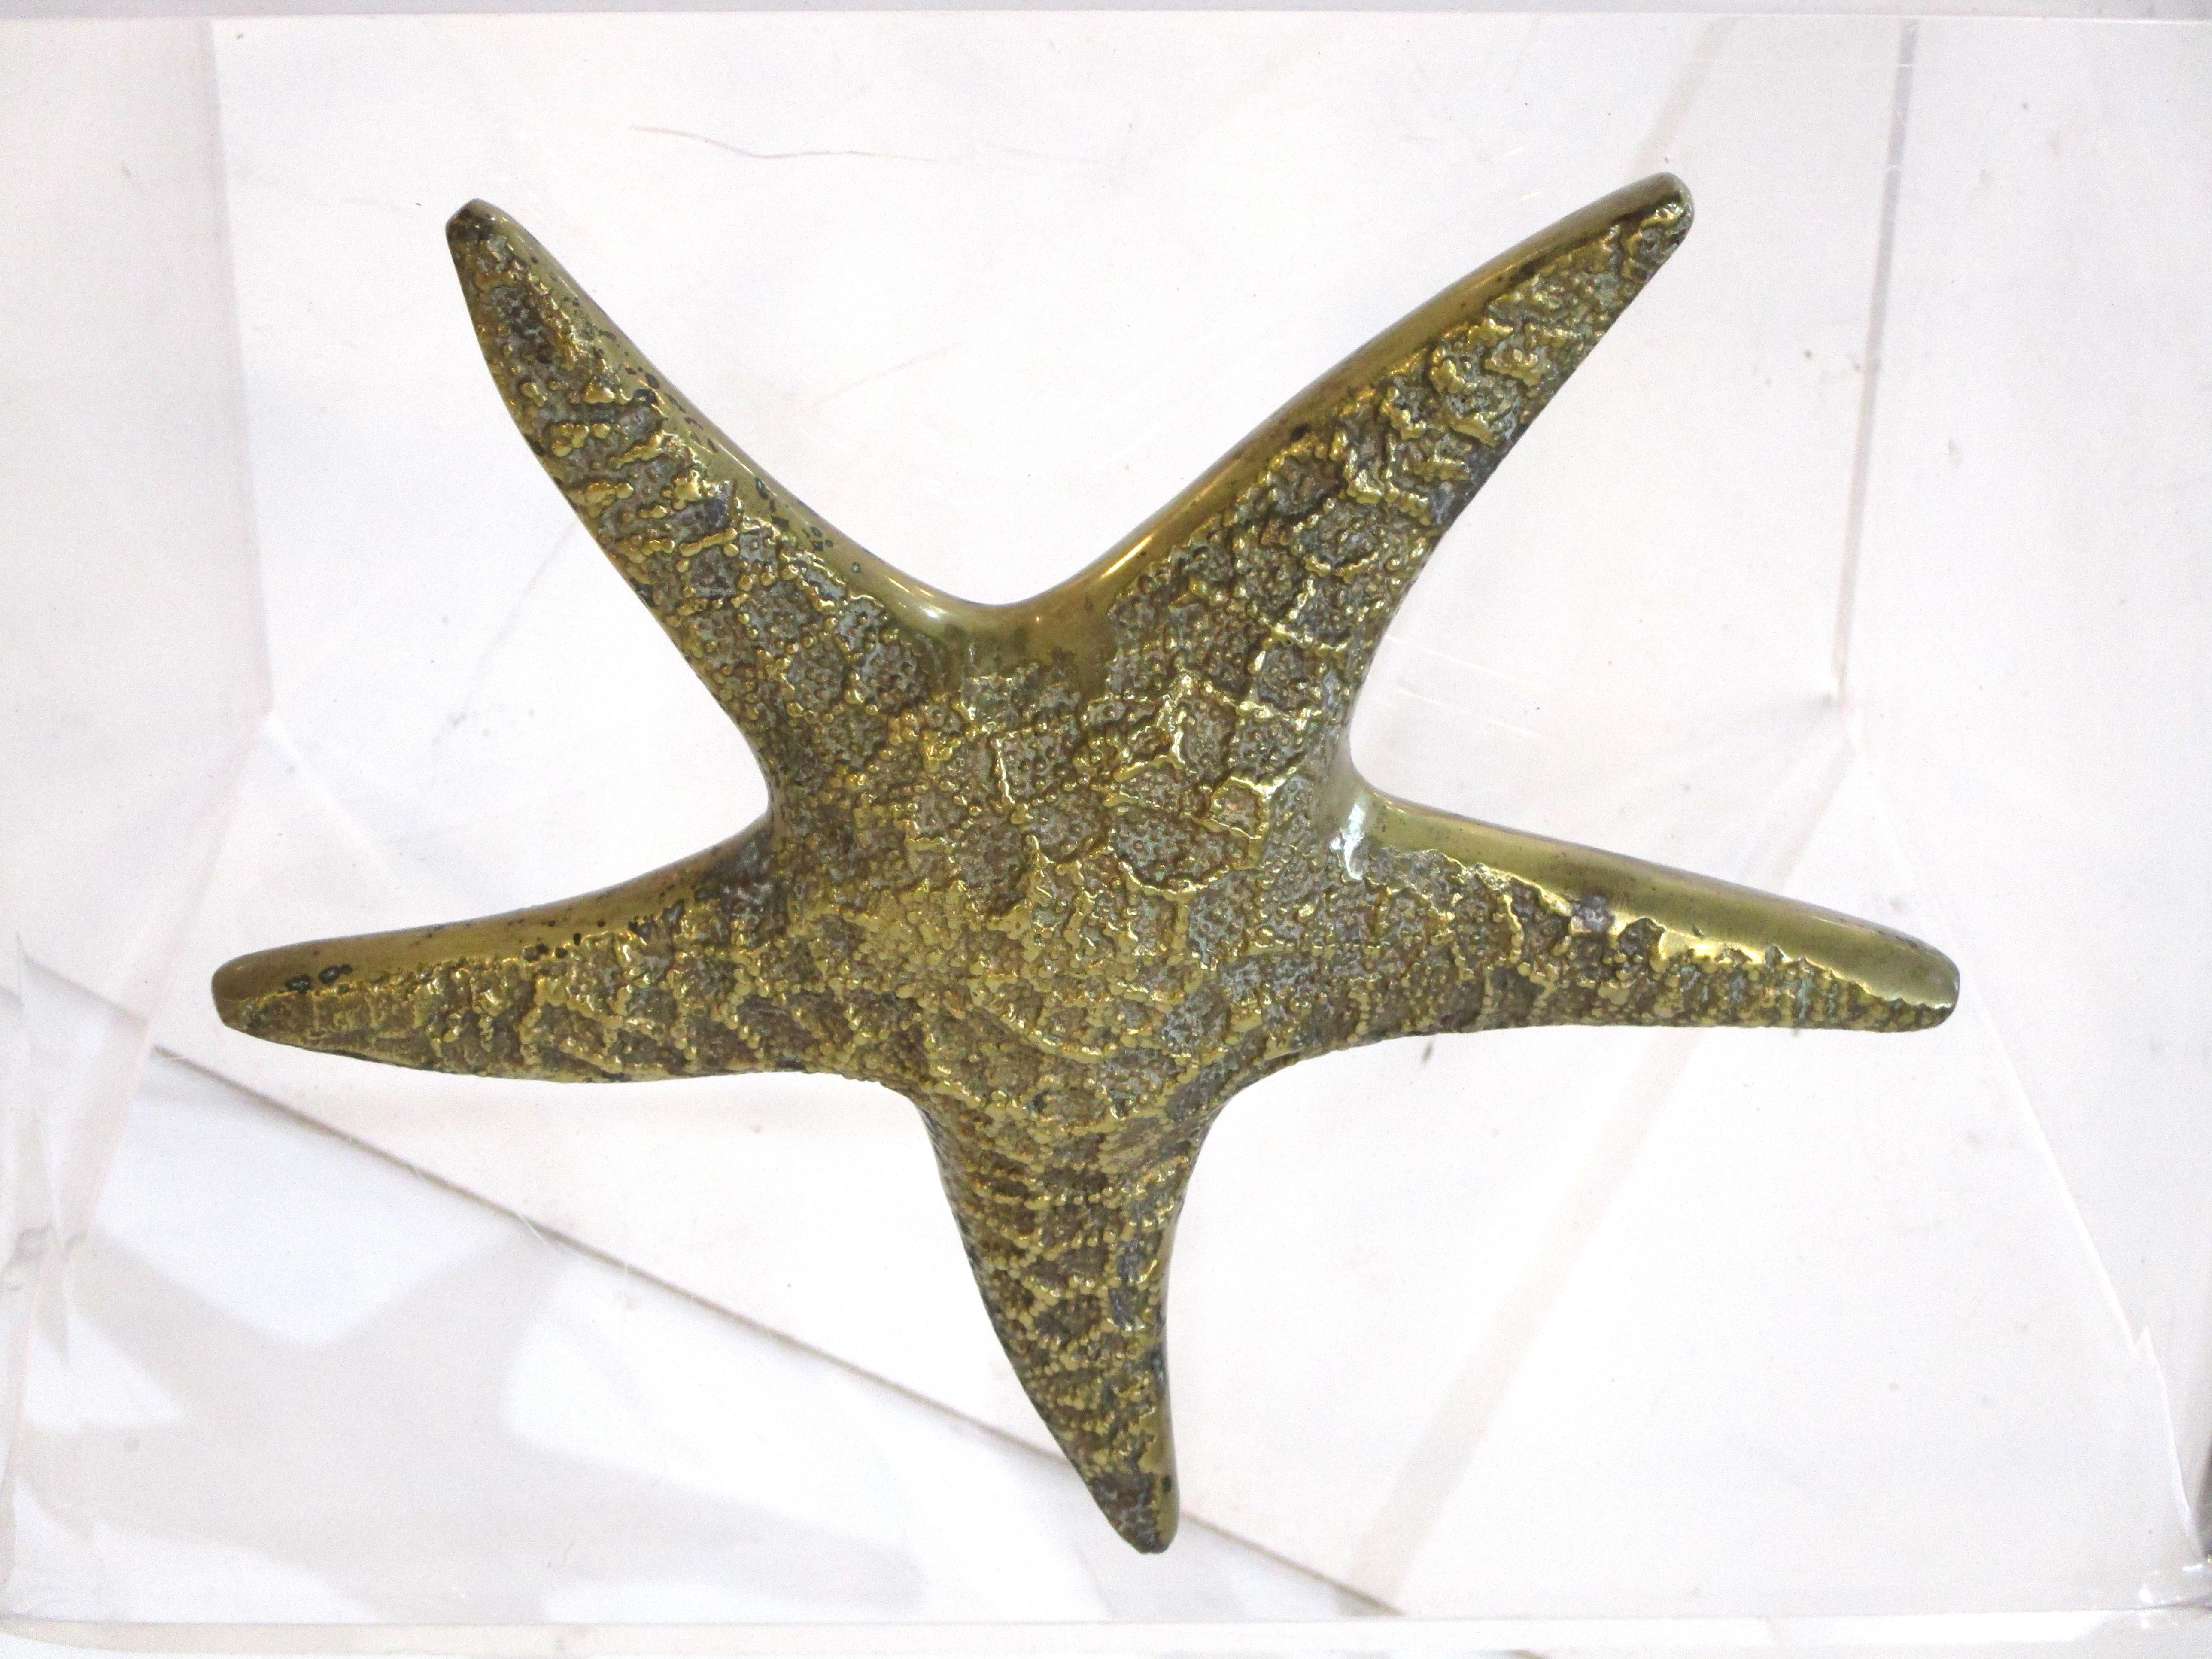 A nicely cast starfish paperweight, sculpture or hanging sculpture since it has a hook to the backside. Well made and can be used in the office or as a decorative accessory, made in Korea.